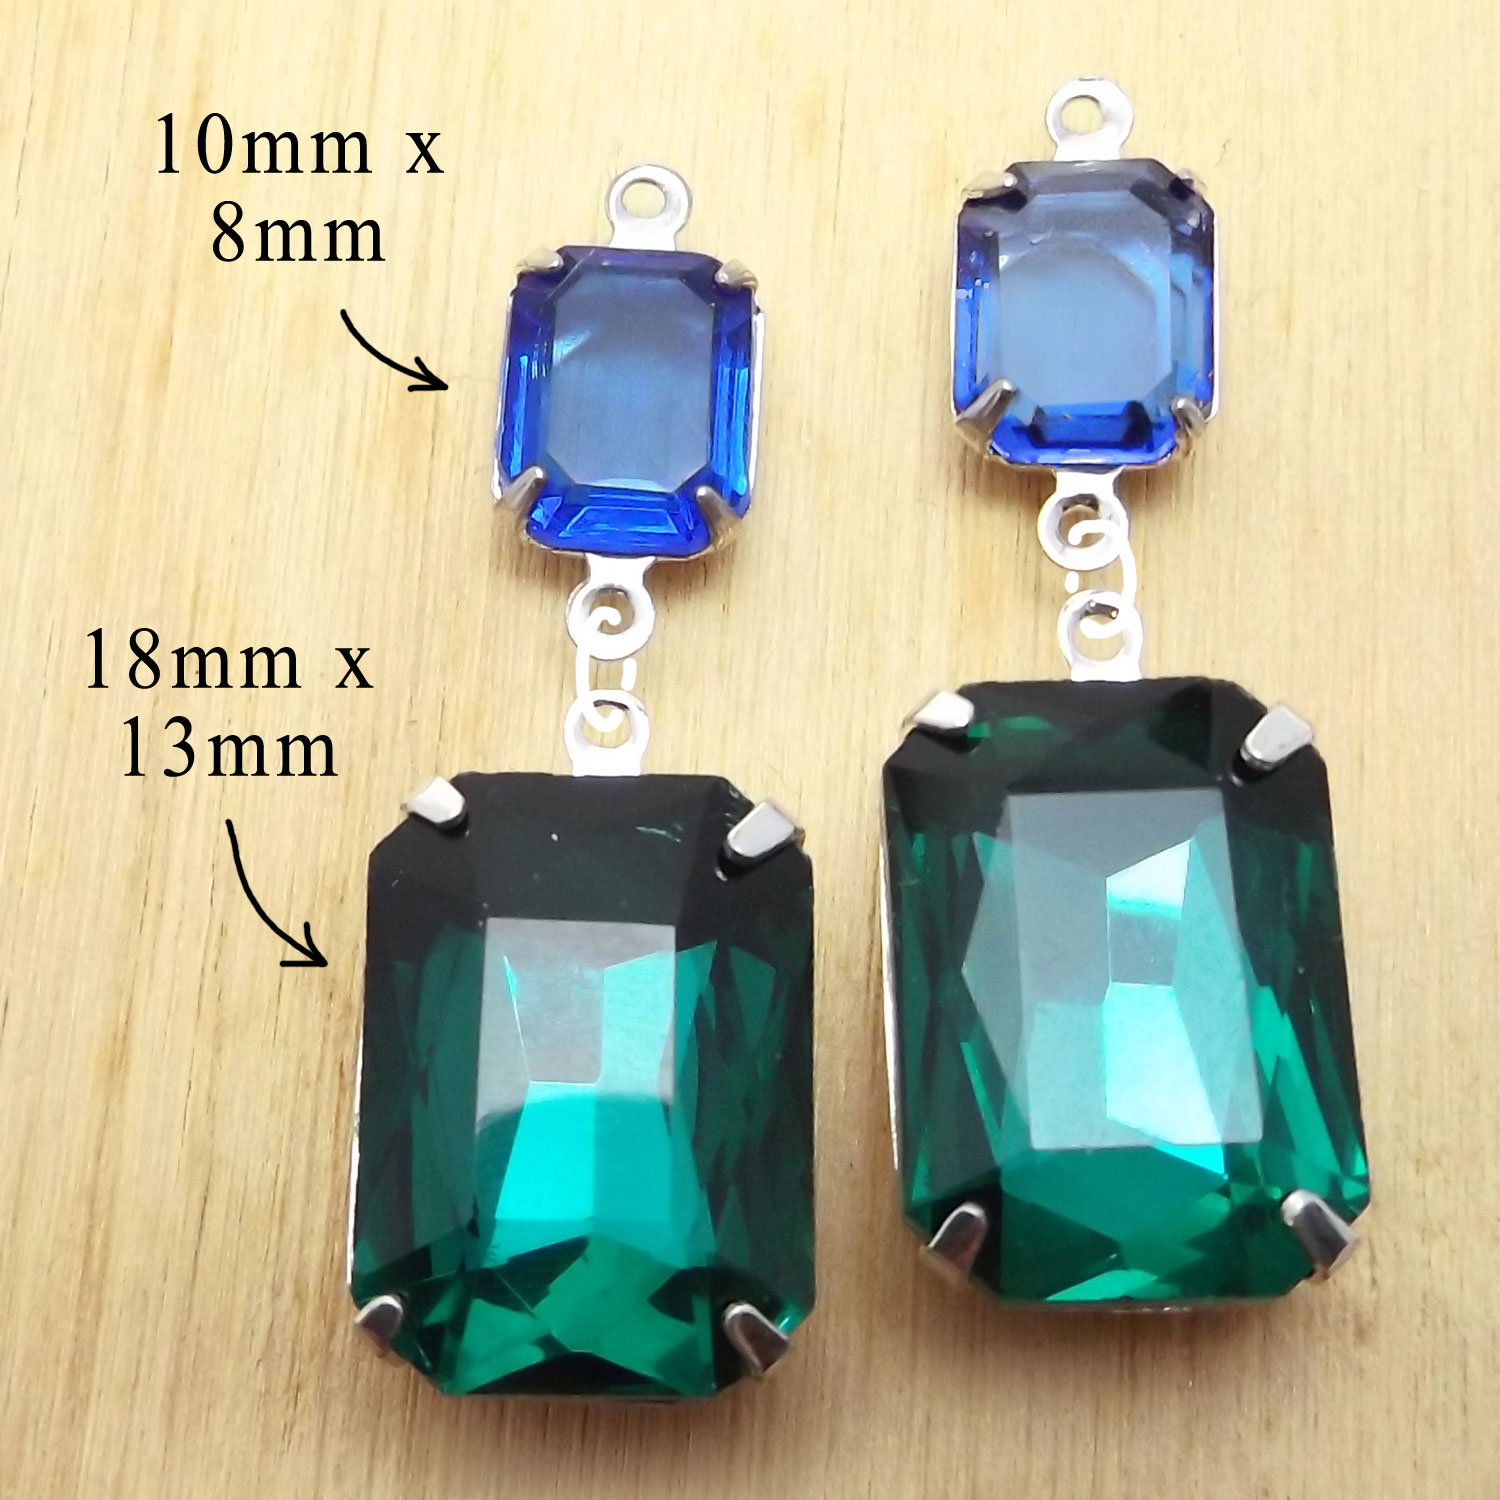 emerald green and sapphire blue rhinestone octagons from my online jewelry supplies shop